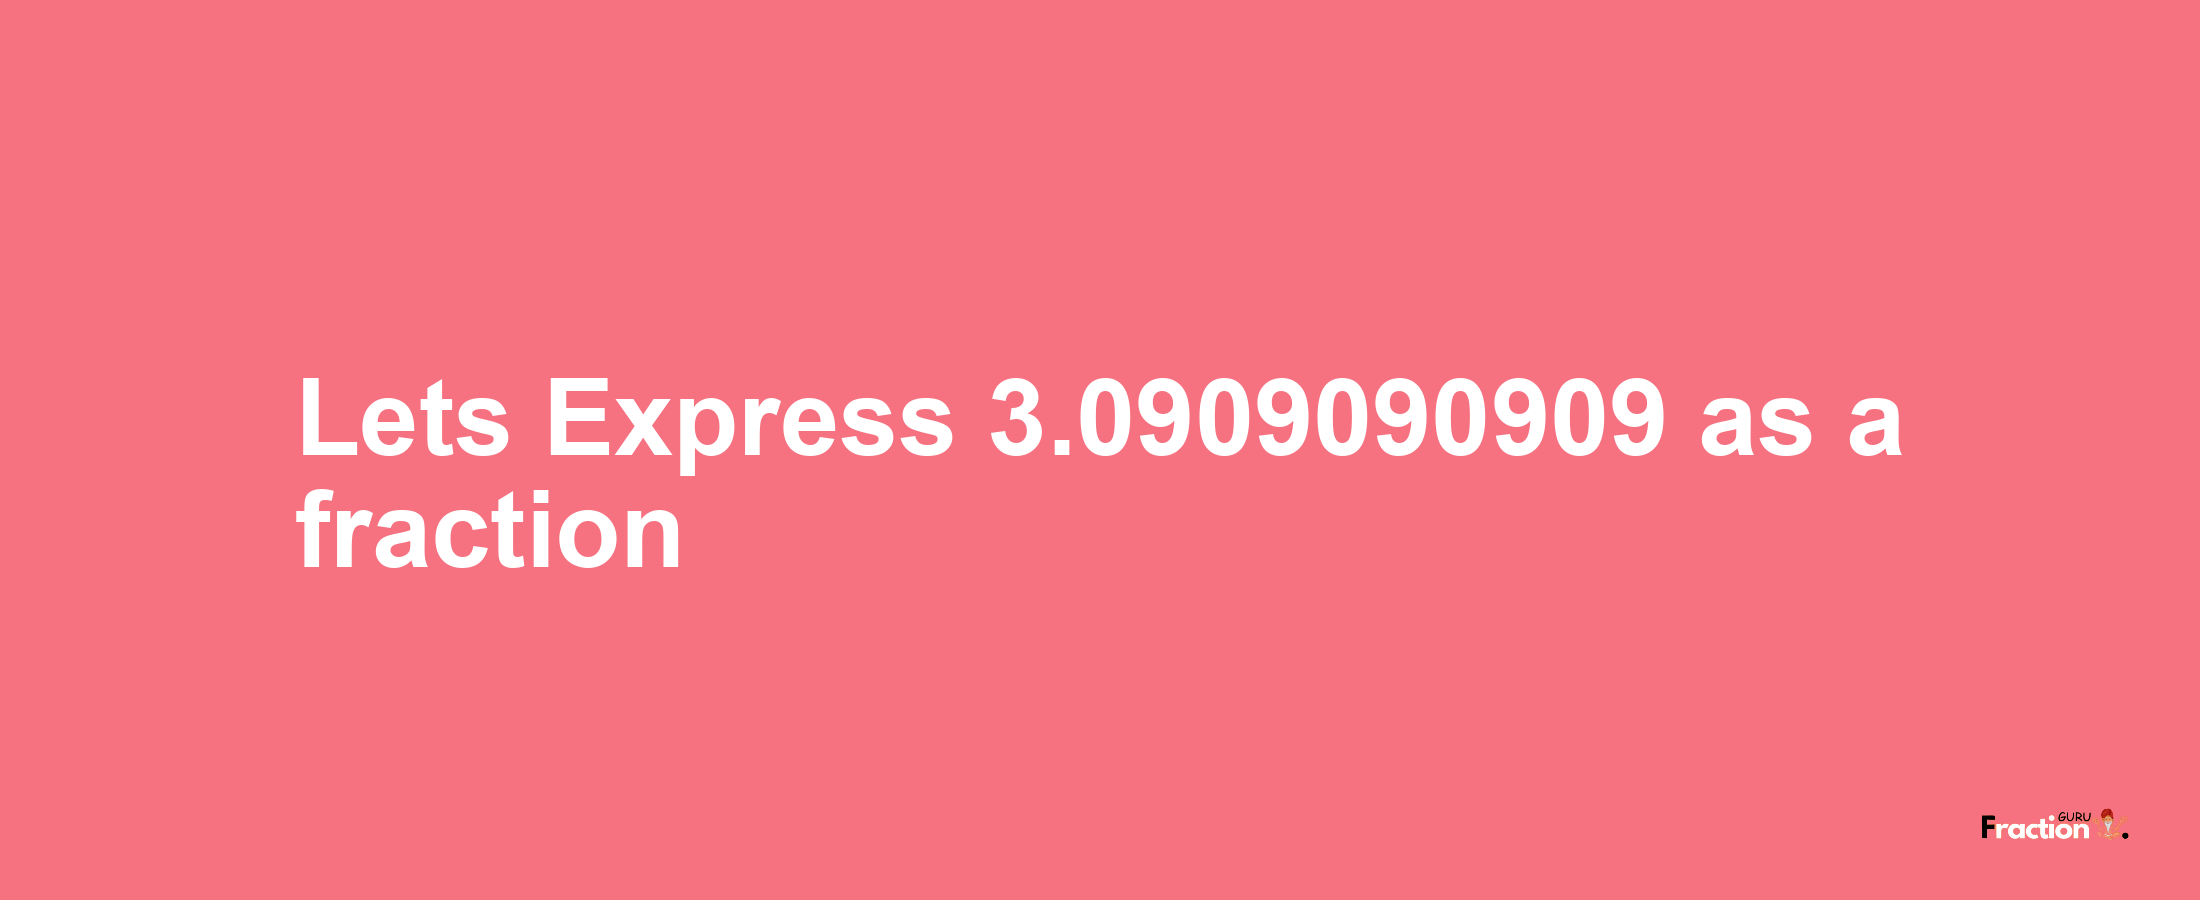 Lets Express 3.0909090909 as afraction